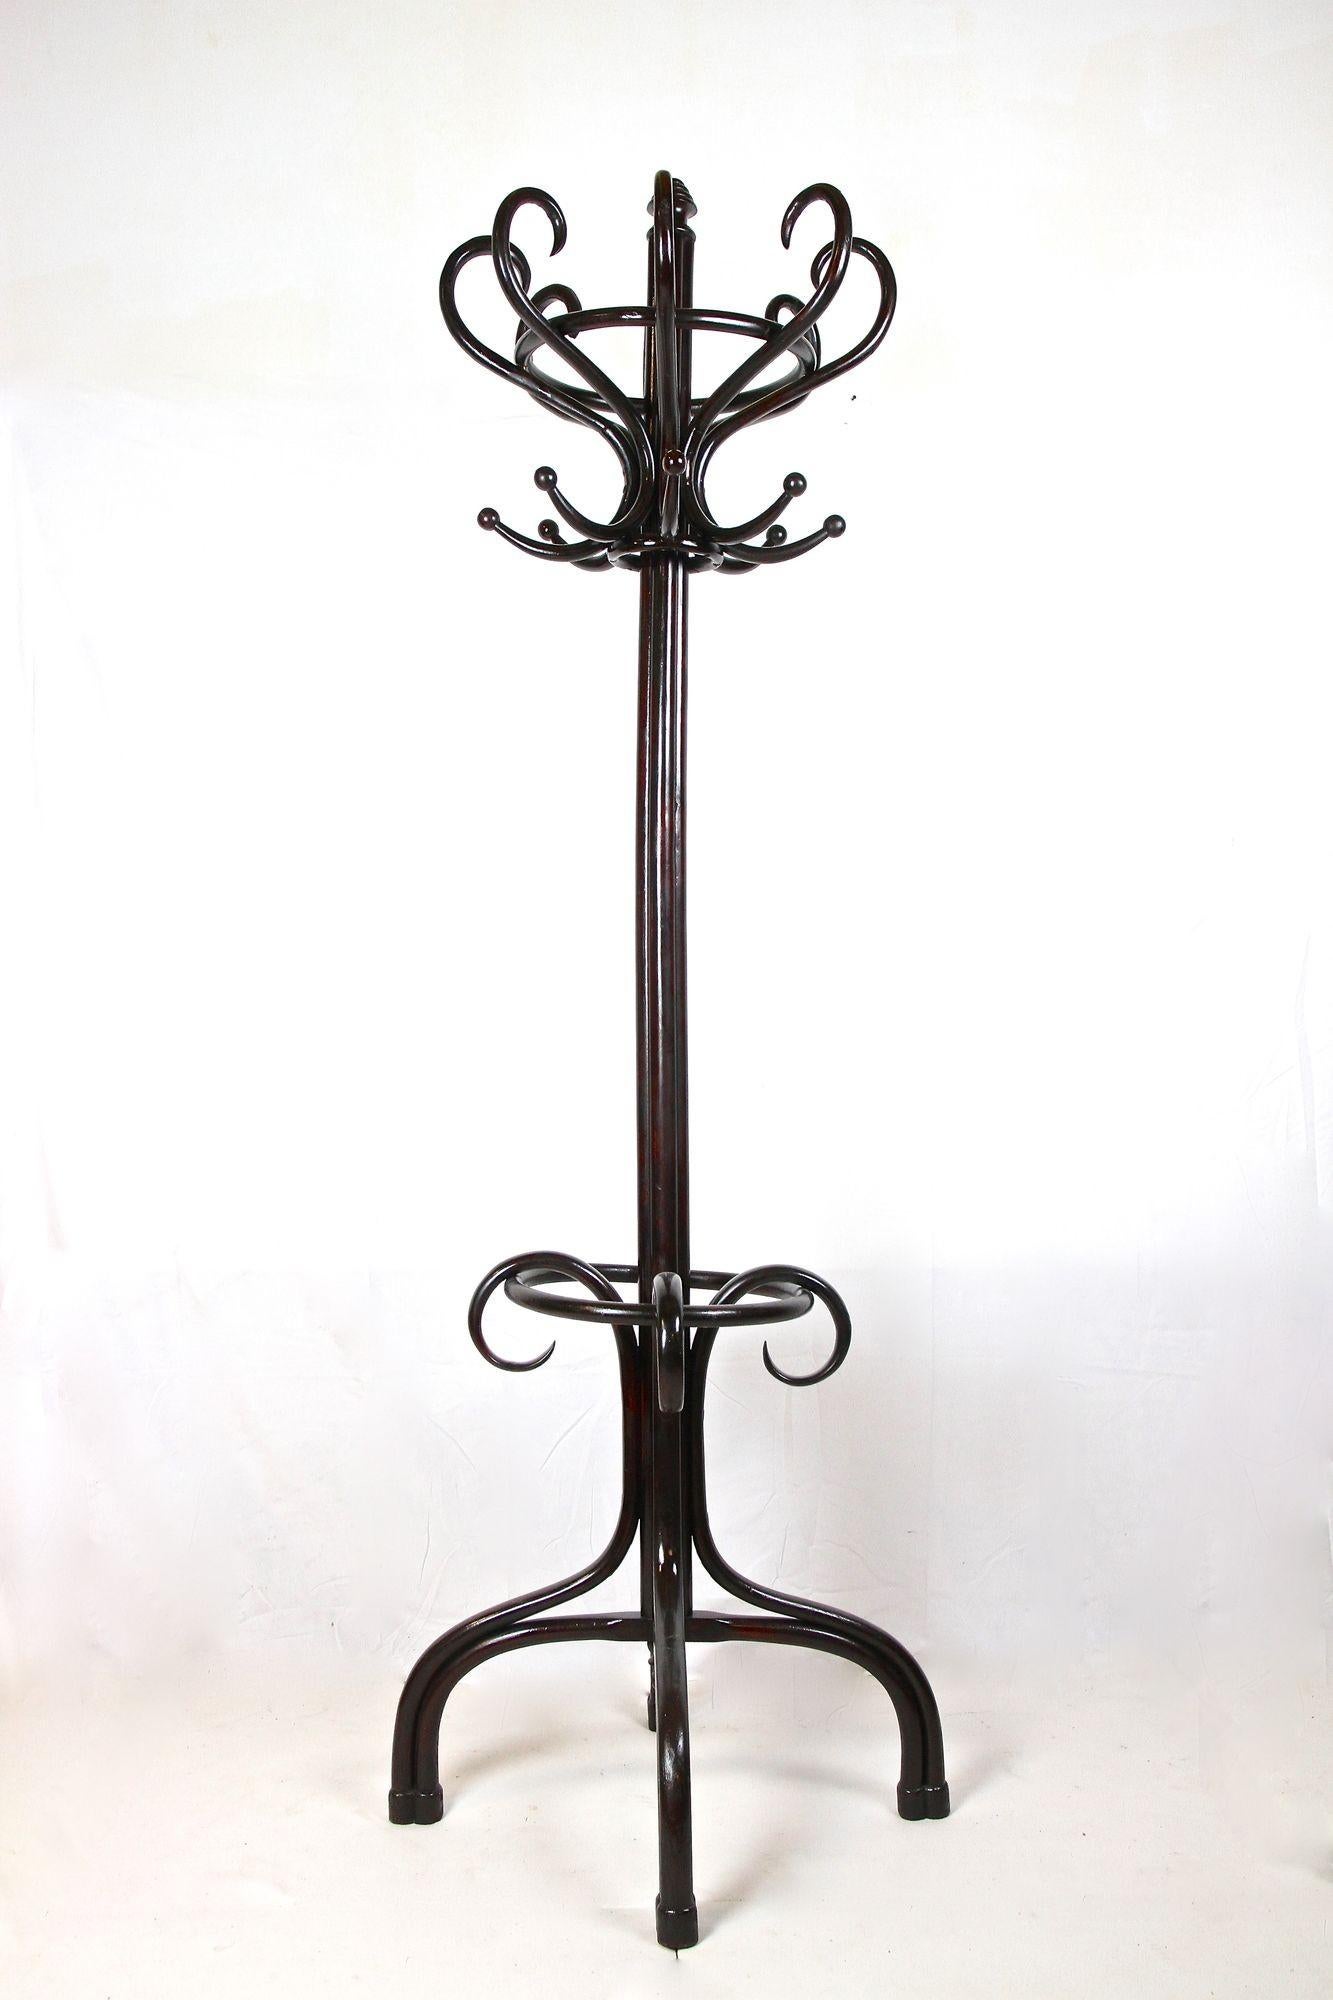 Thonet Coat Rack/ Wardrobe Stand Bentwood Polished, Art Nouveau, AT ca. 1905 For Sale 4